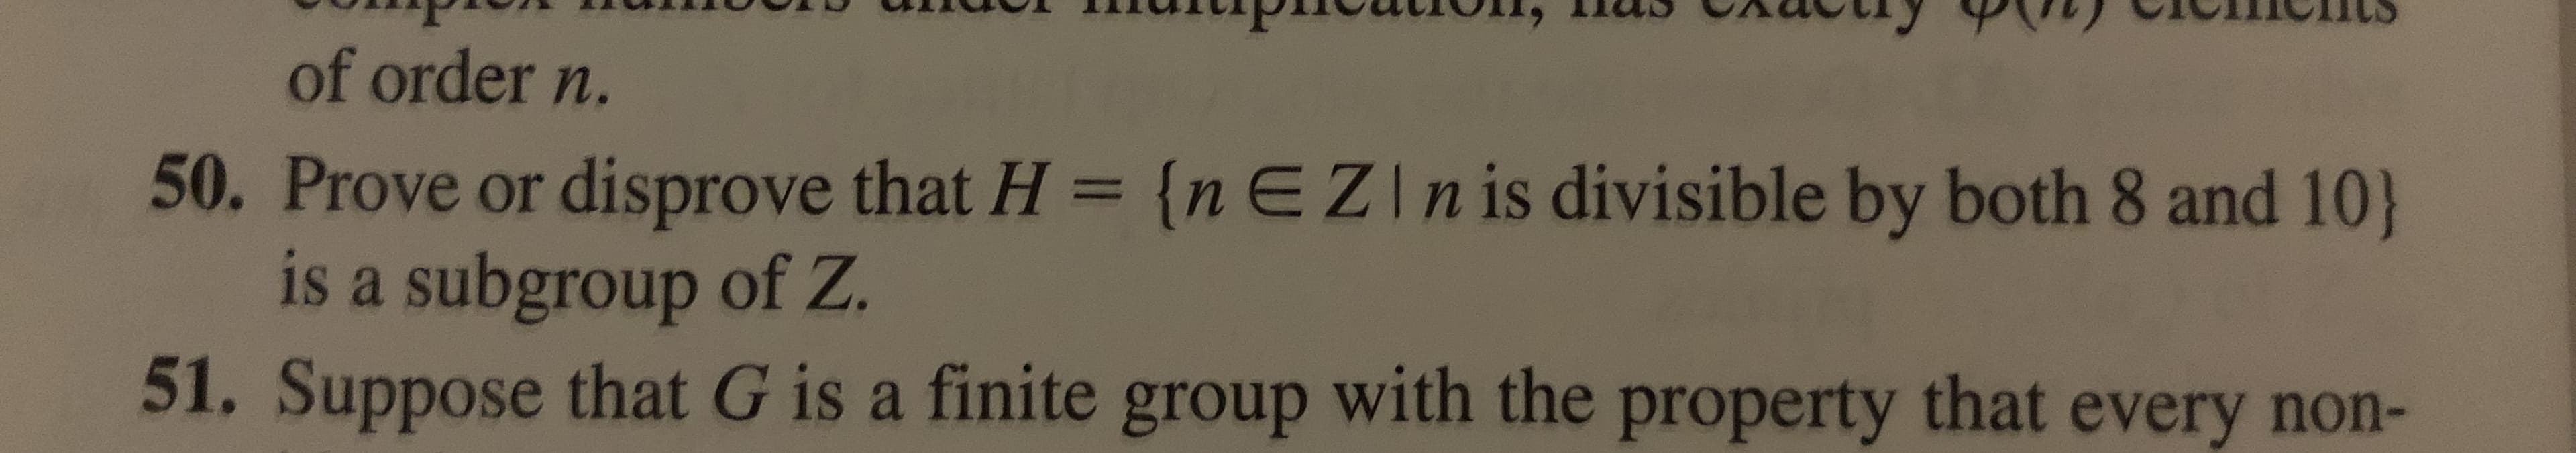 of order n.
50. Prove or disprove that H = {nEZIn is divisible by both 8 and 10)
is a subgroup of Z.
51. Suppose that G is a finite group with the property that every non-
